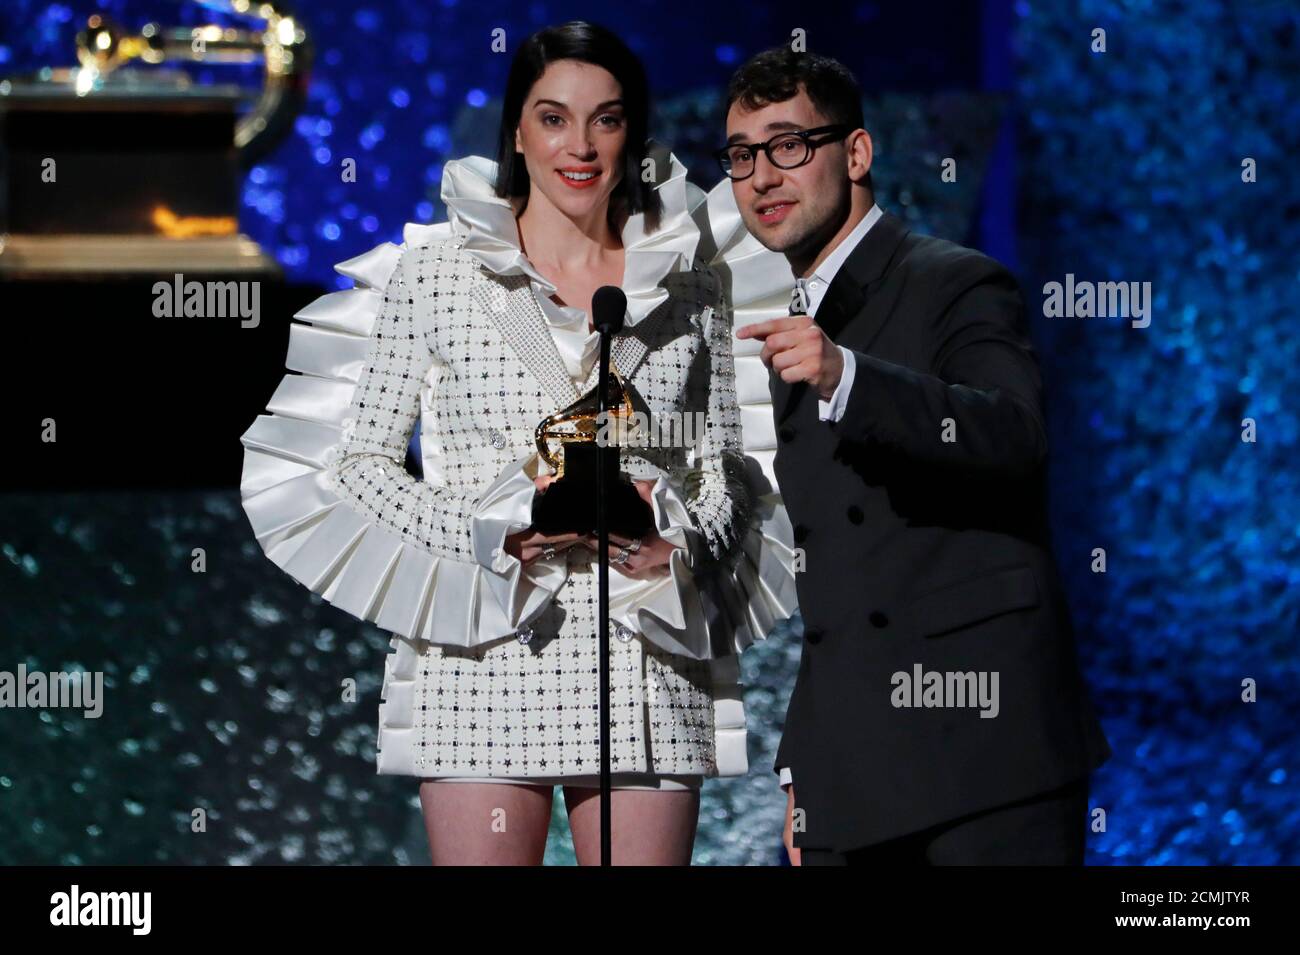 61st Grammy Awards - Show - Los Angeles, California, U.S., February 10, 2019  - Annie Clark and Jack Antonoff win Best Rock Song for "Masseduction"  REUTERS/Mike Blake Stock Photo - Alamy